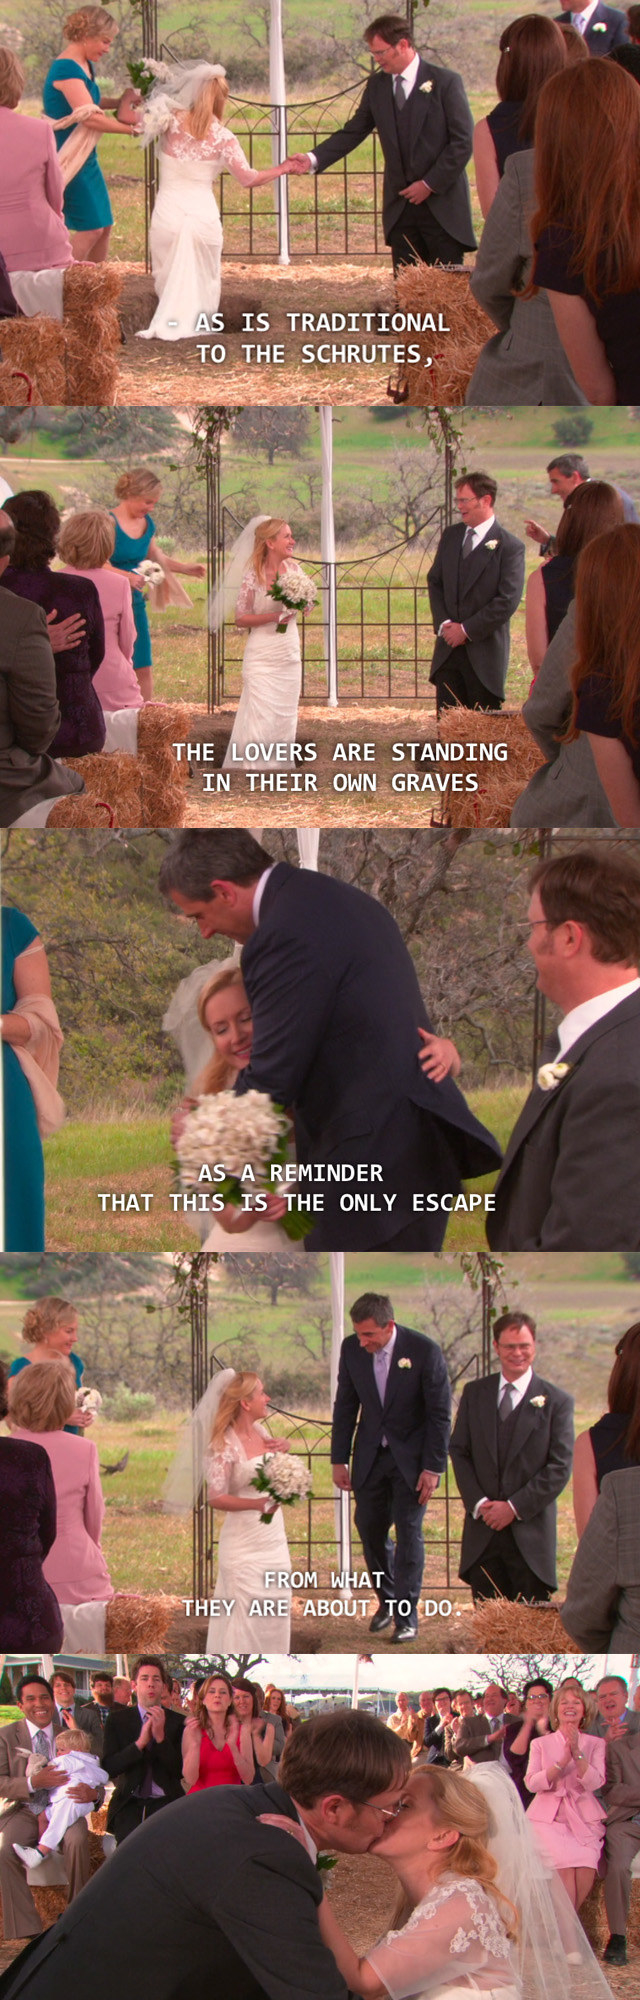 19 Dwight And Angela Moments From 